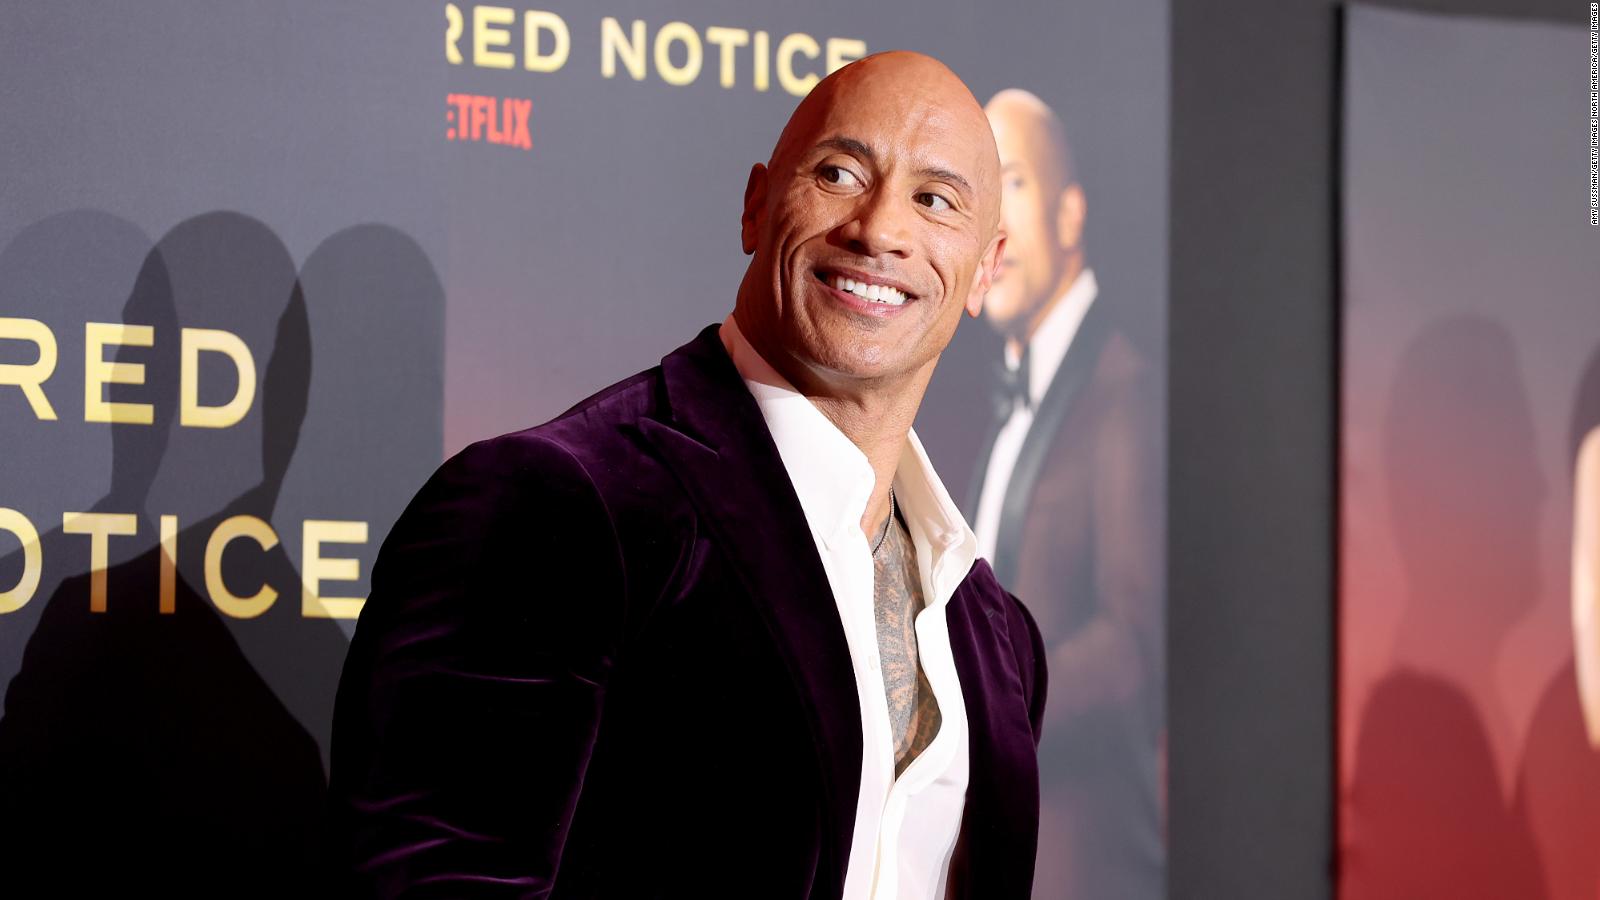 dwayne johnson and wife back together